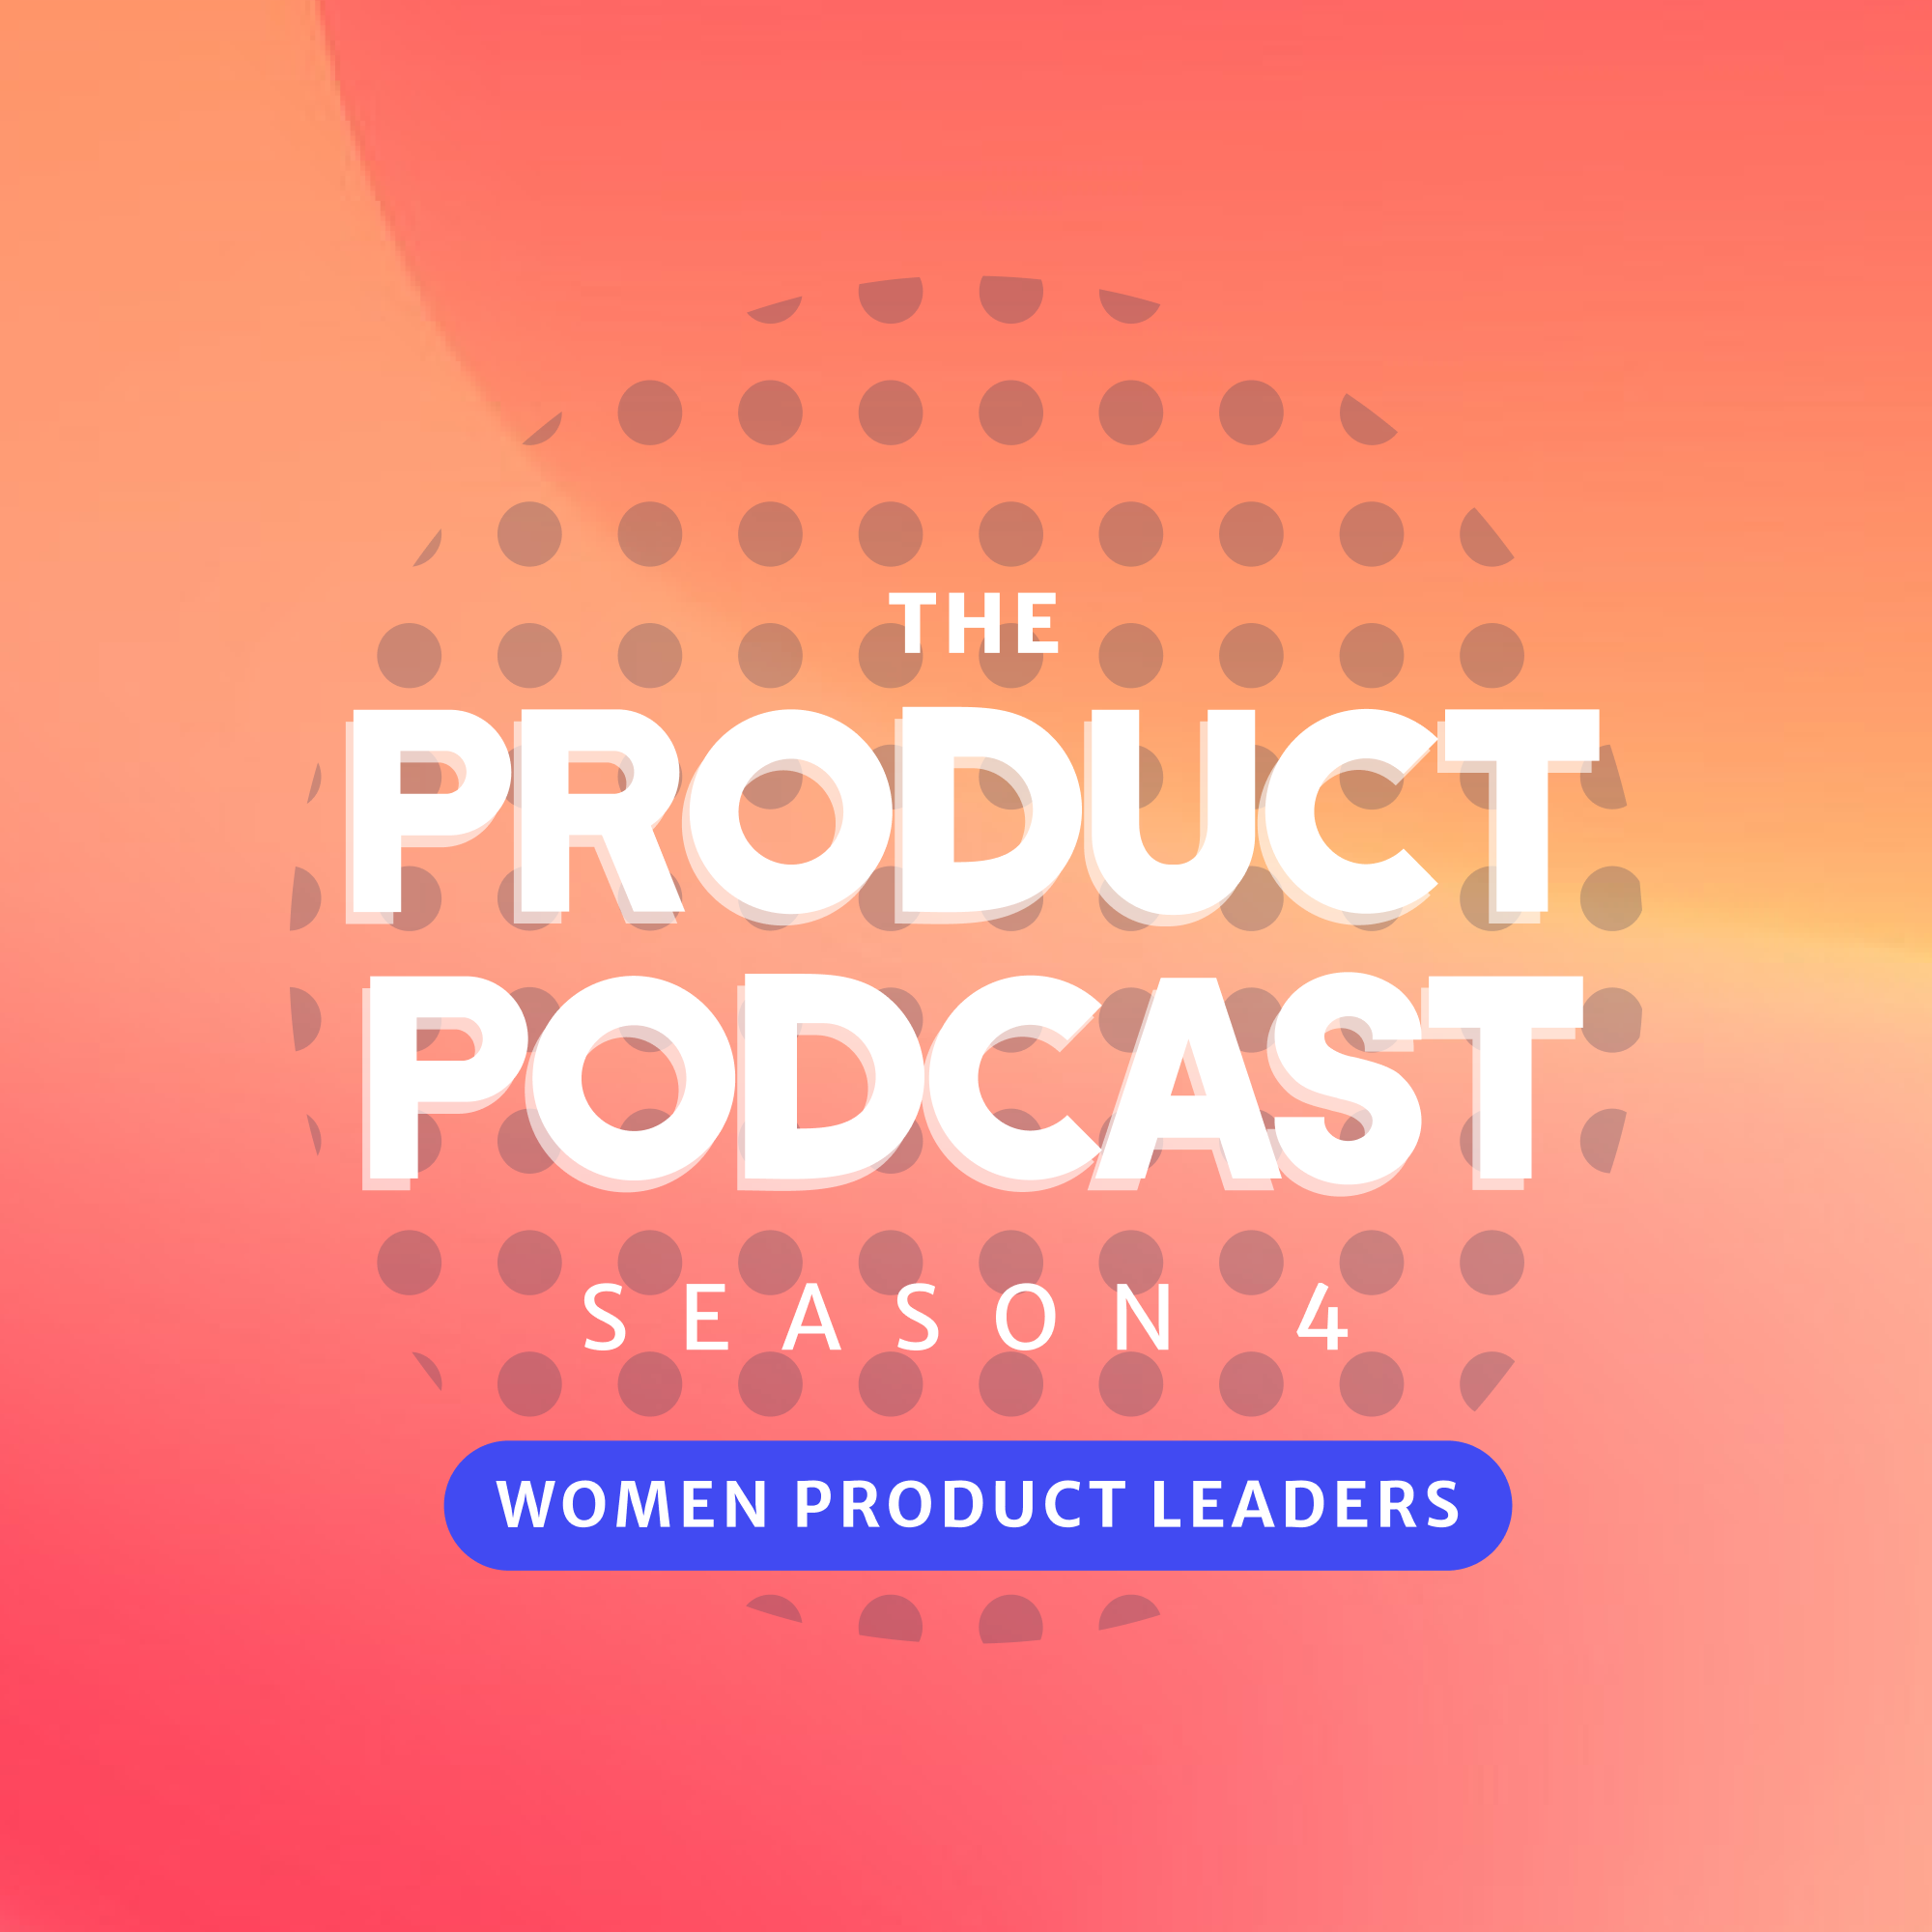 Product Podcast Season 4 Cover "Women Product Leaders"